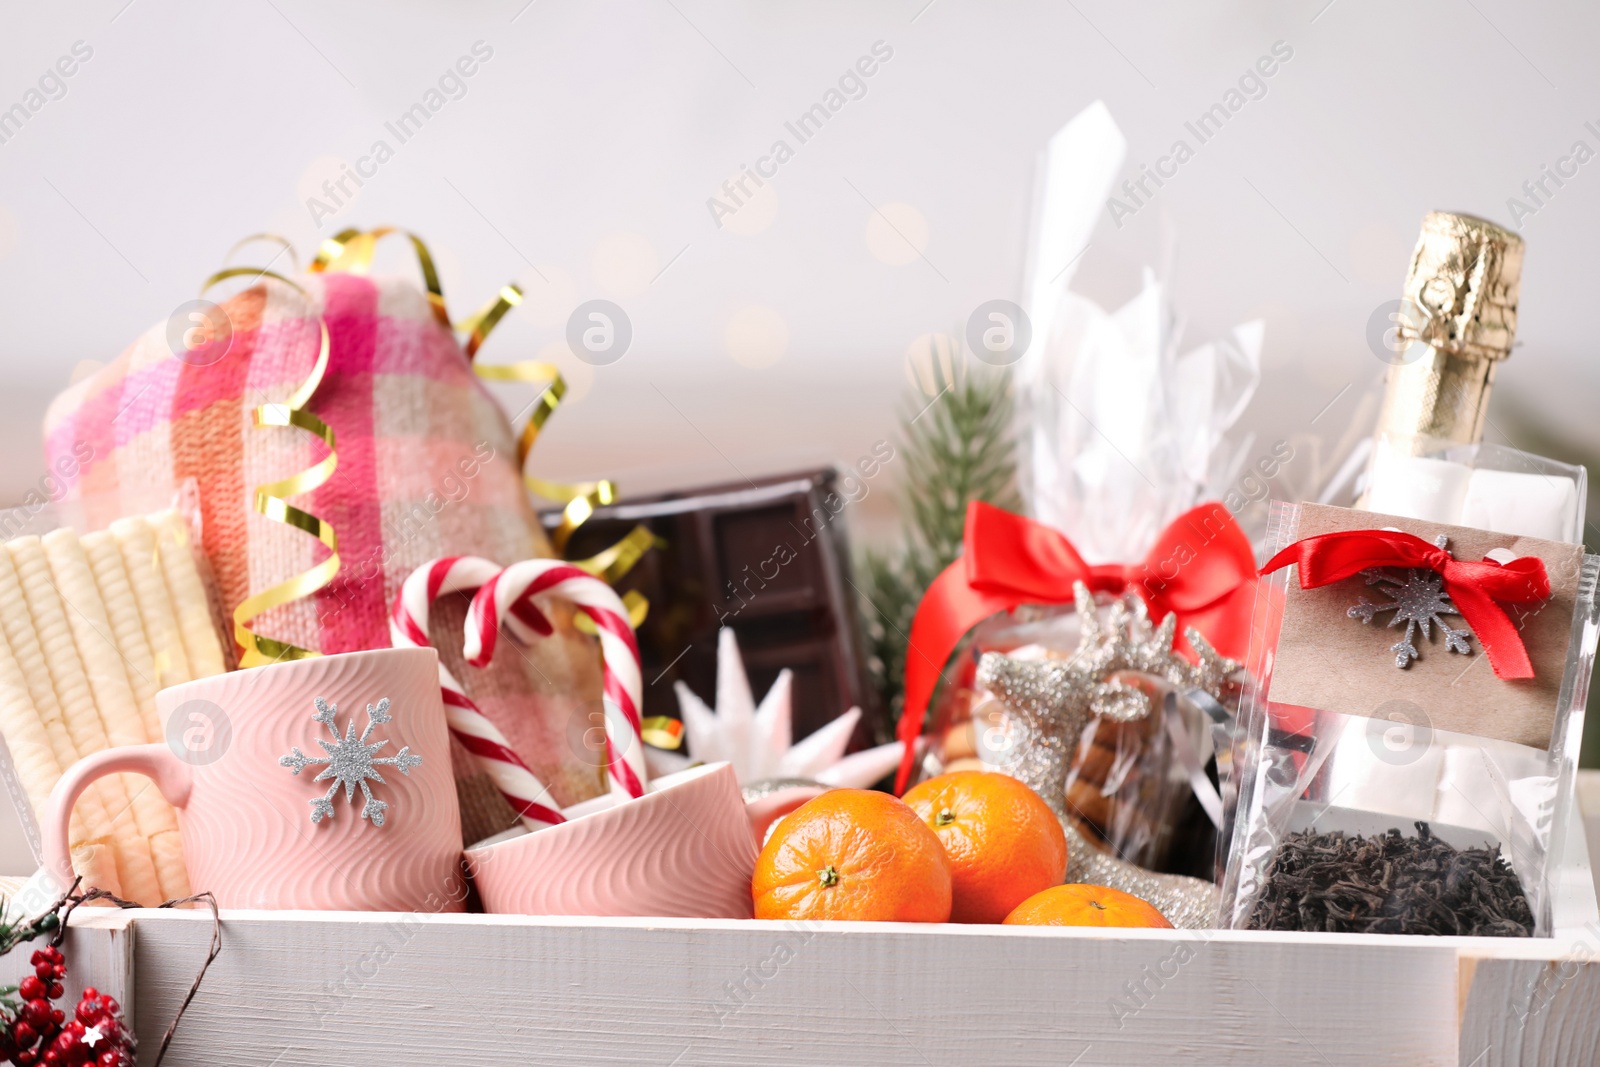 Photo of Crate with Christmas gift set on blurred background